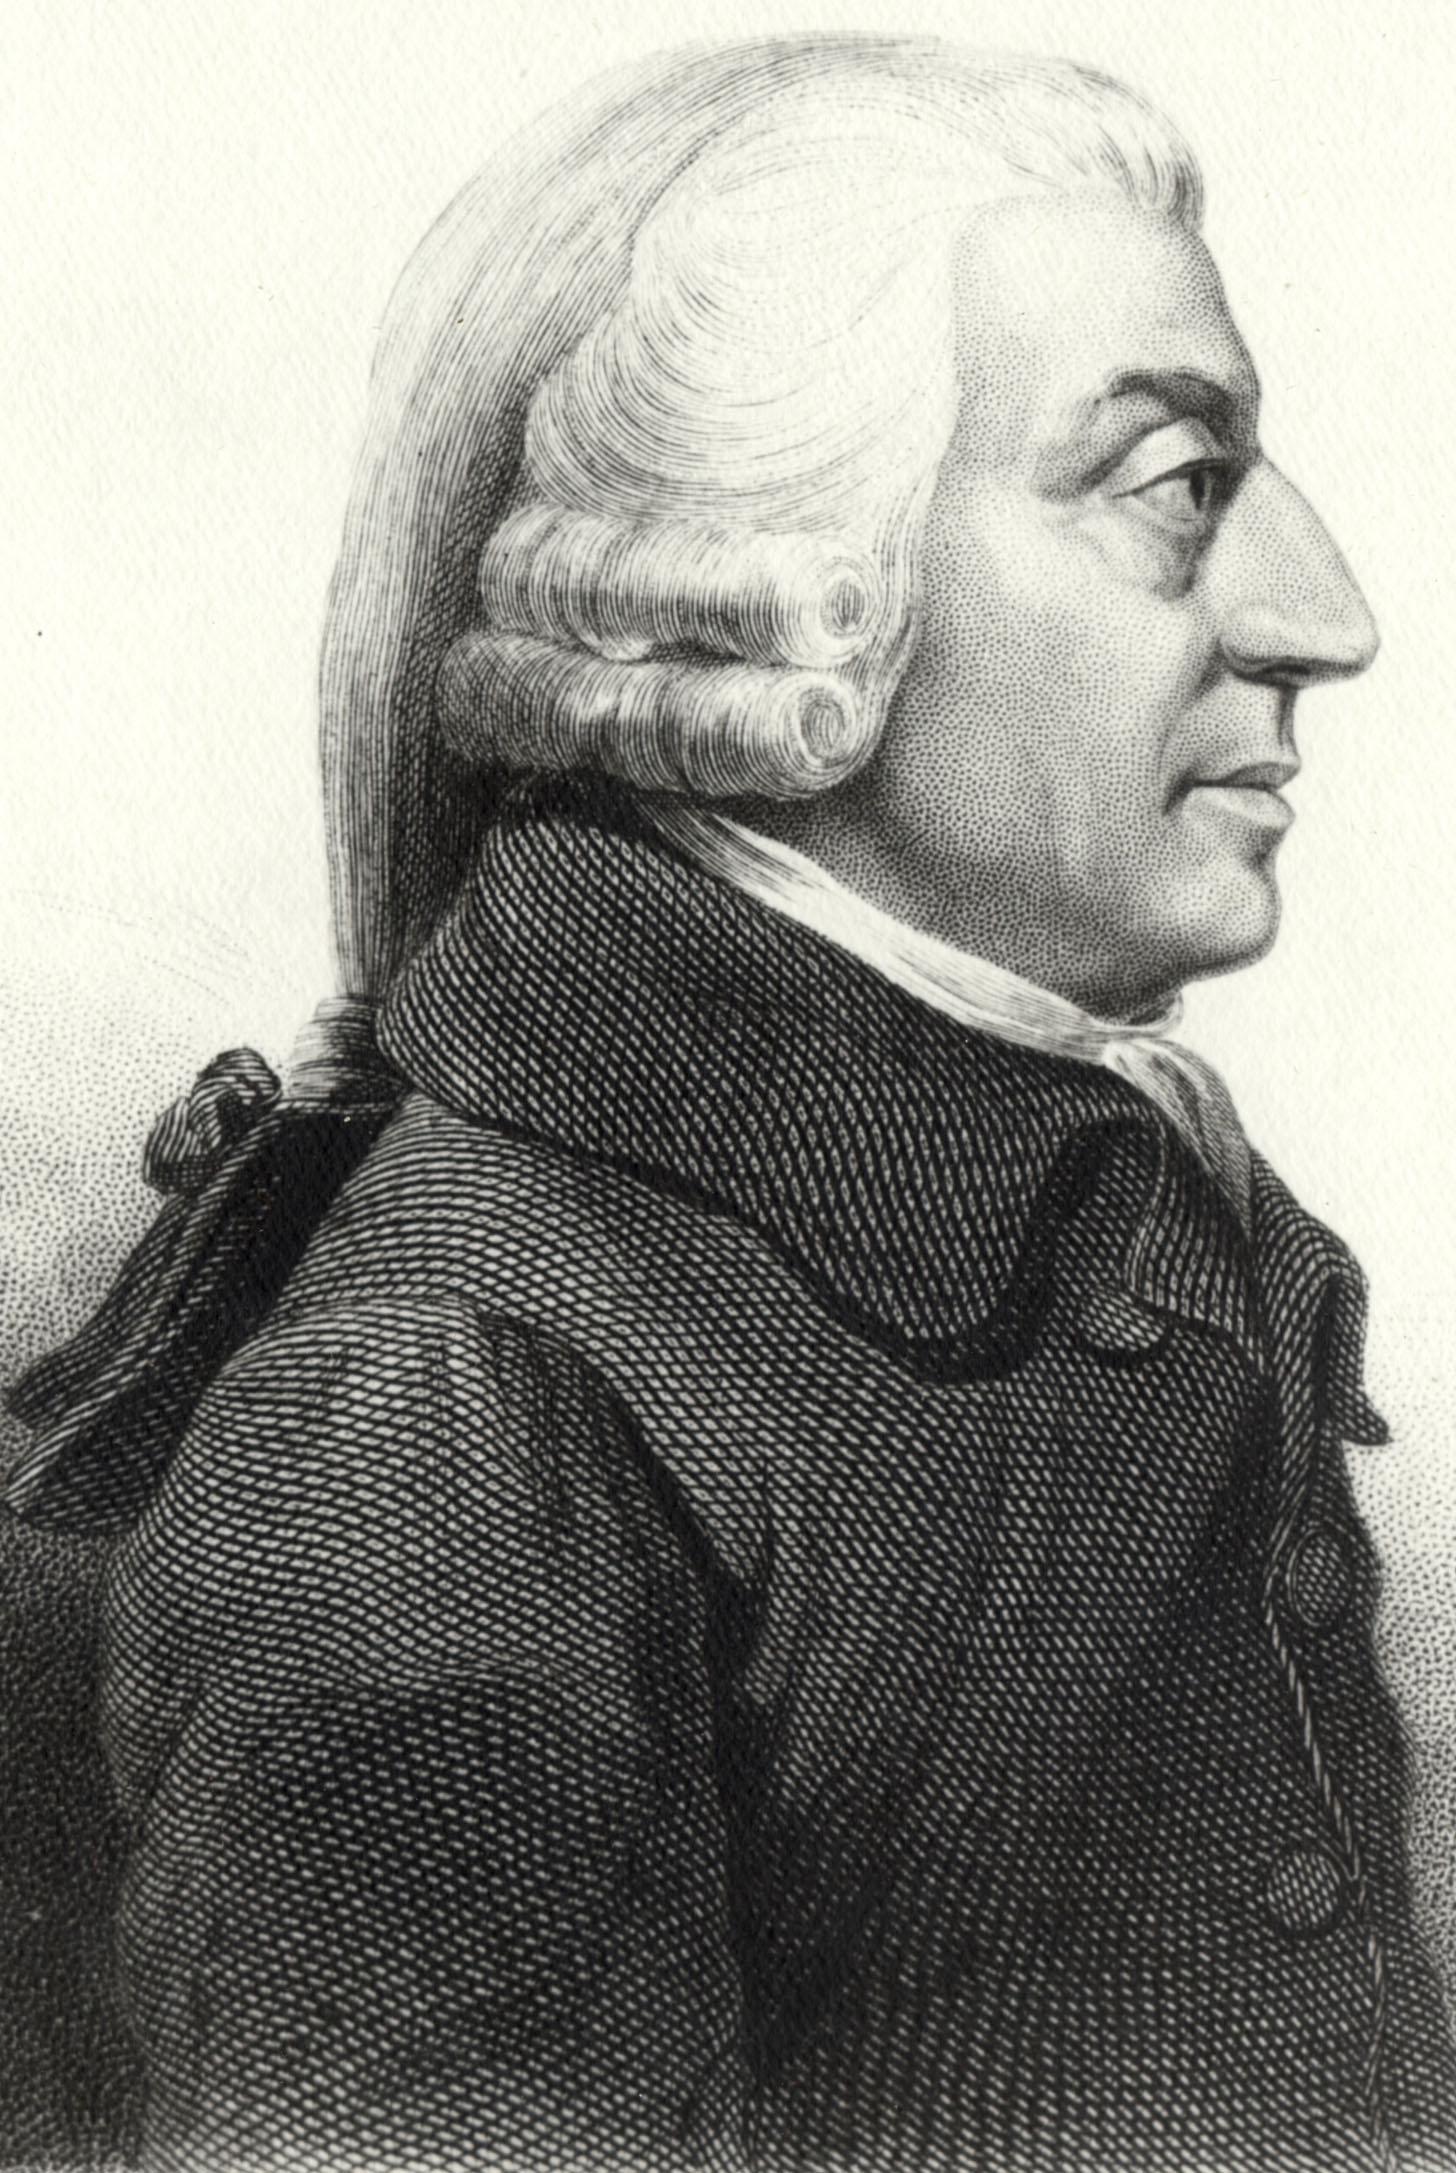 One leader of the Scottish Enlightenment was Adam Smith, the father of modern economic science.